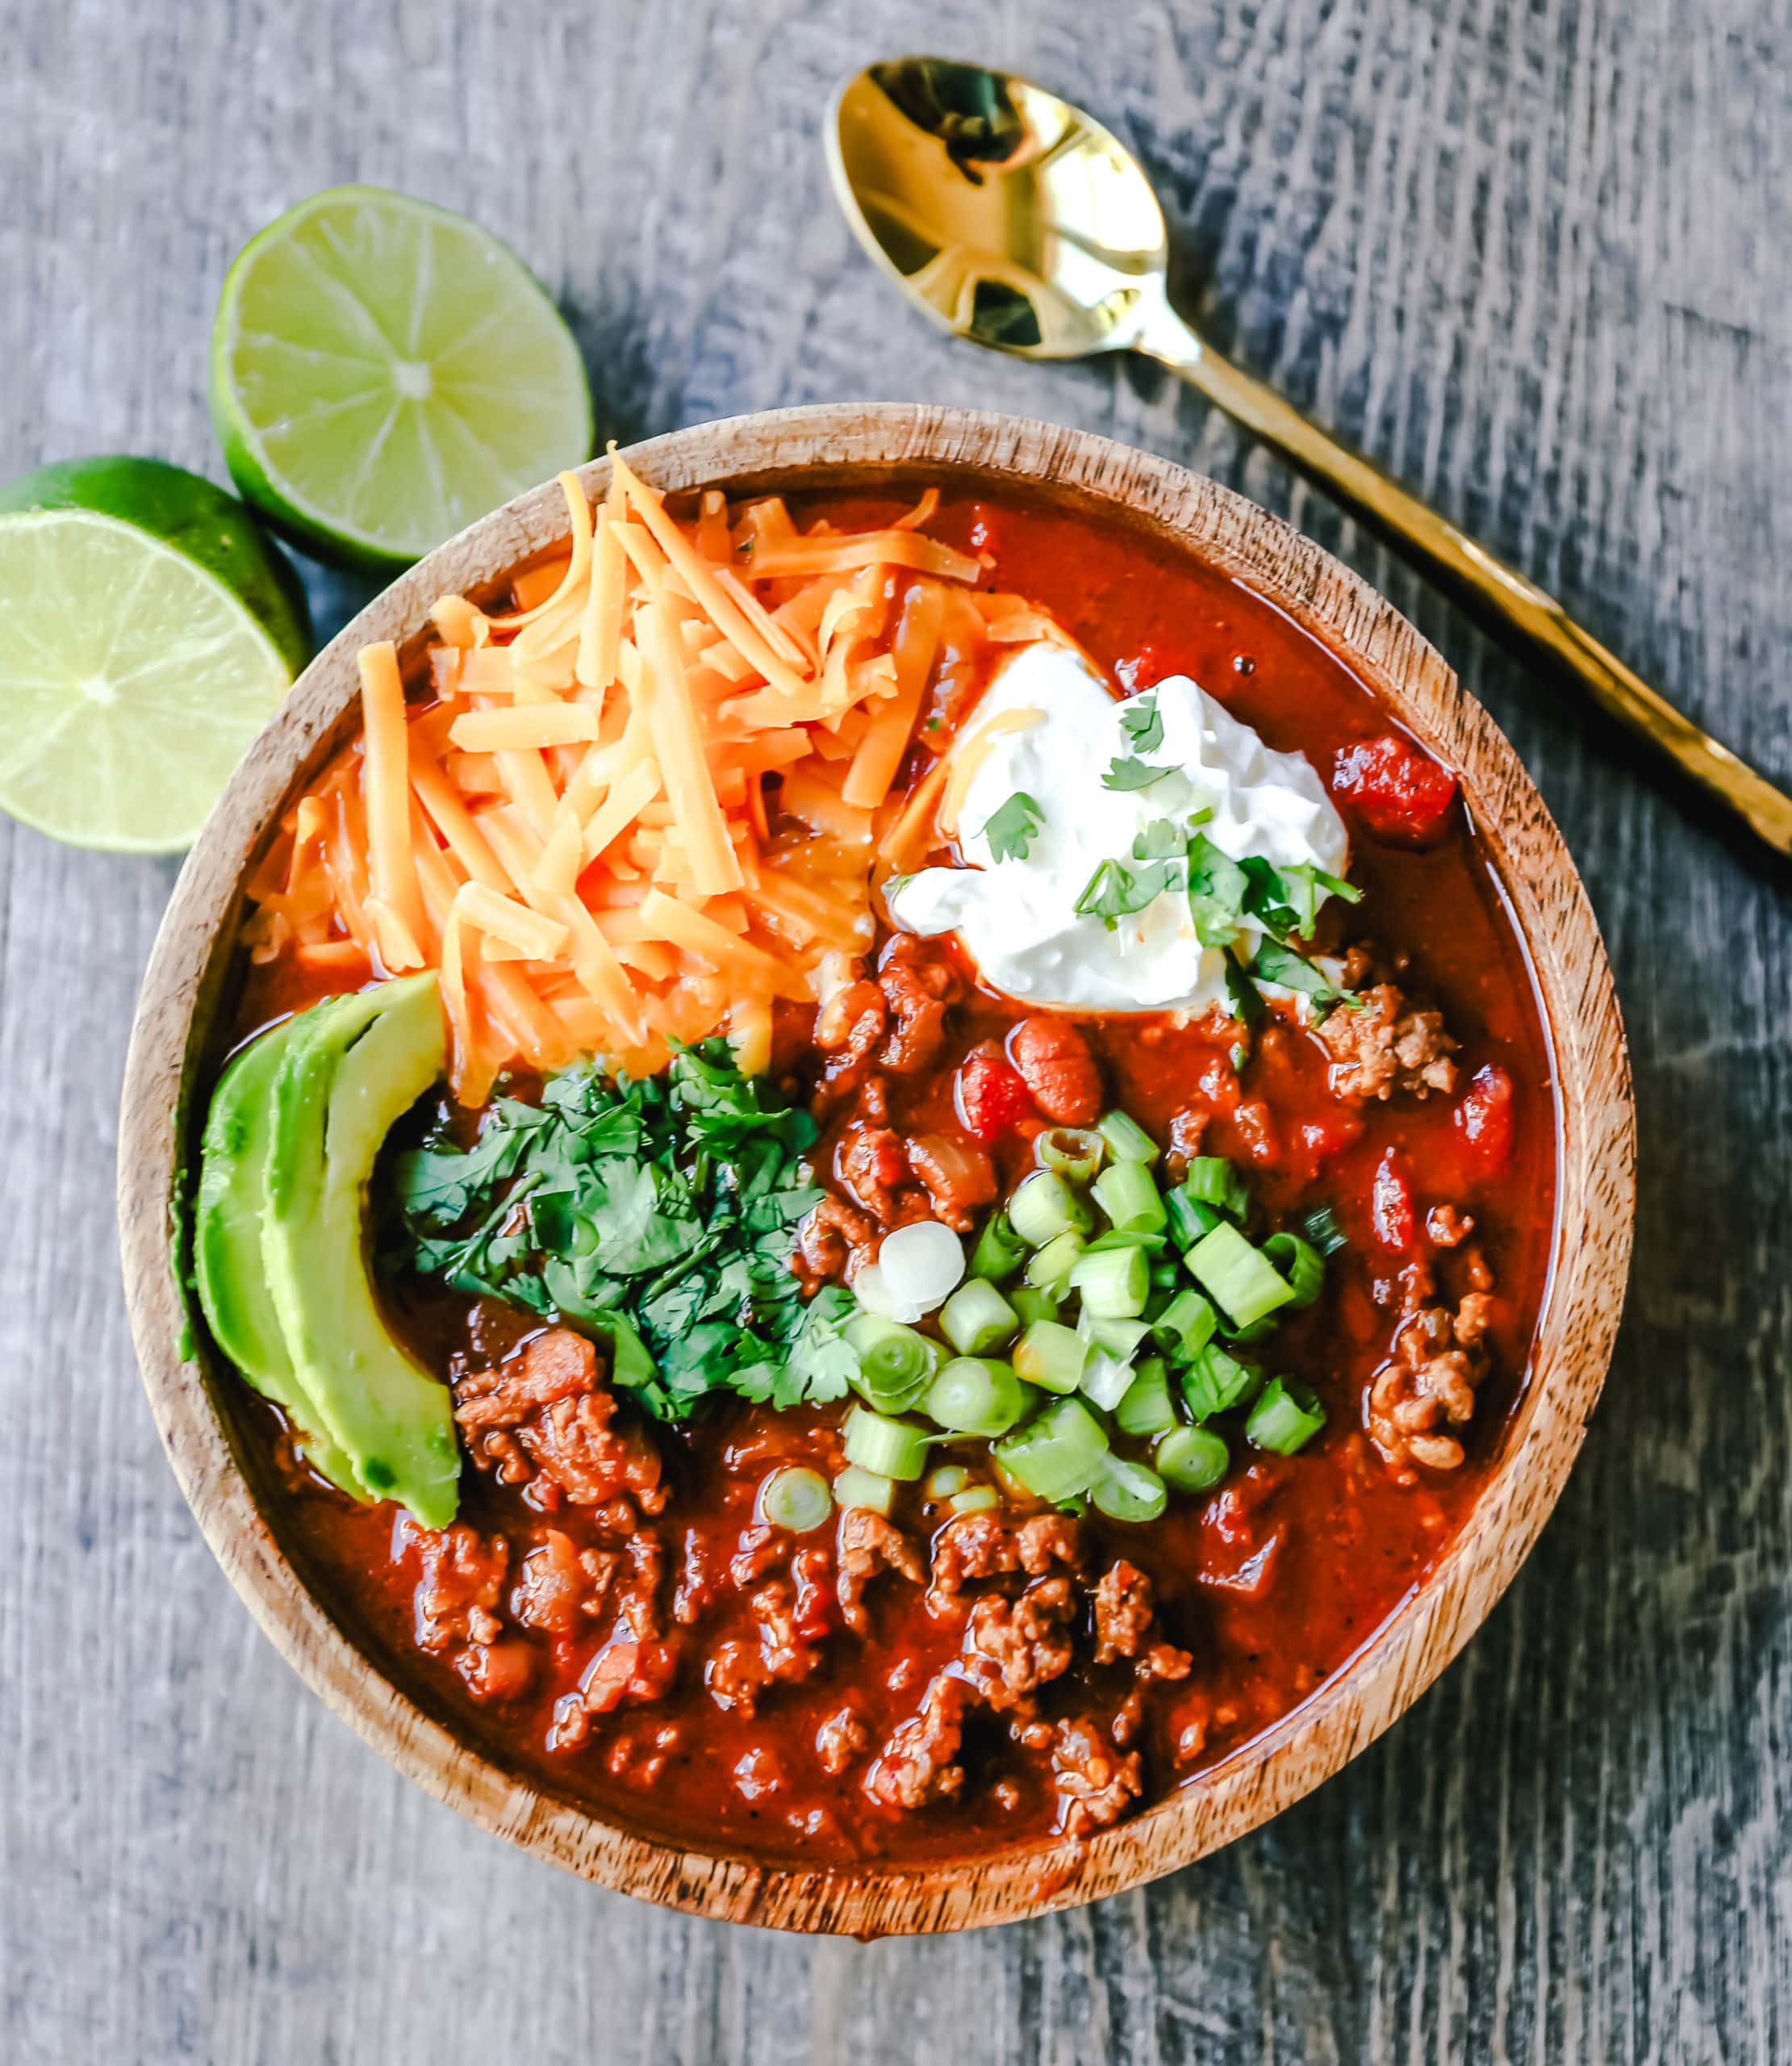 Award-Winning Beef Chili Recipe Chili Cook-Off Winning Beef Chili Recipe. There are SECRET ingredients that make this a winning chili recipe. How to make the best chili around! People will be begging for the recipe and want to know your secrets. www.modernhoney.com #chili #chilirecipe #beefchili 